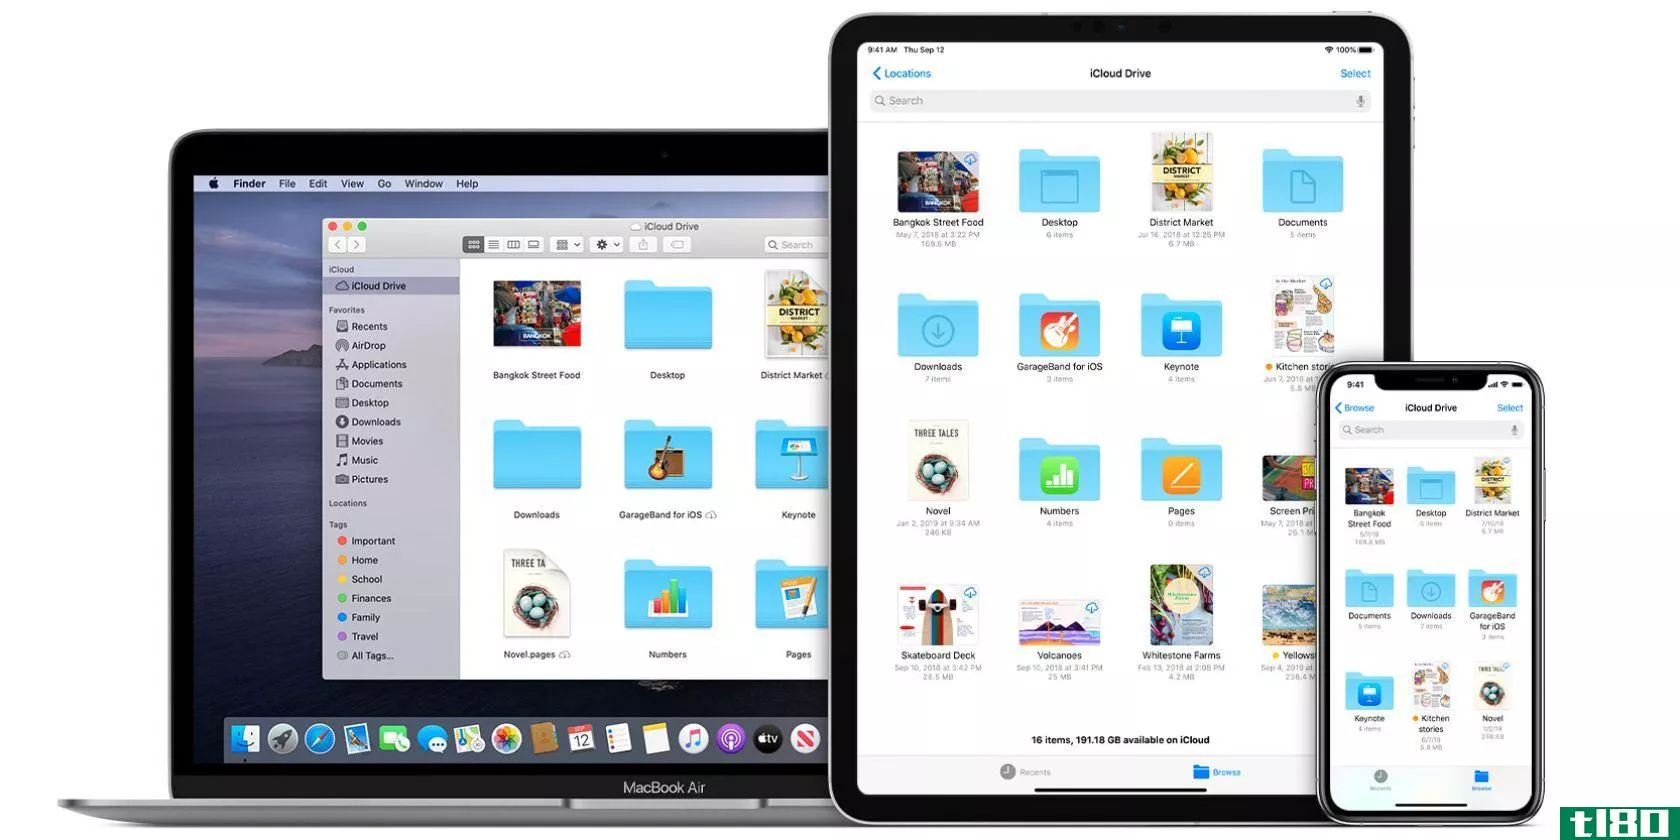 MacBook, iPad, and iPhone showing iCloud Drive documents